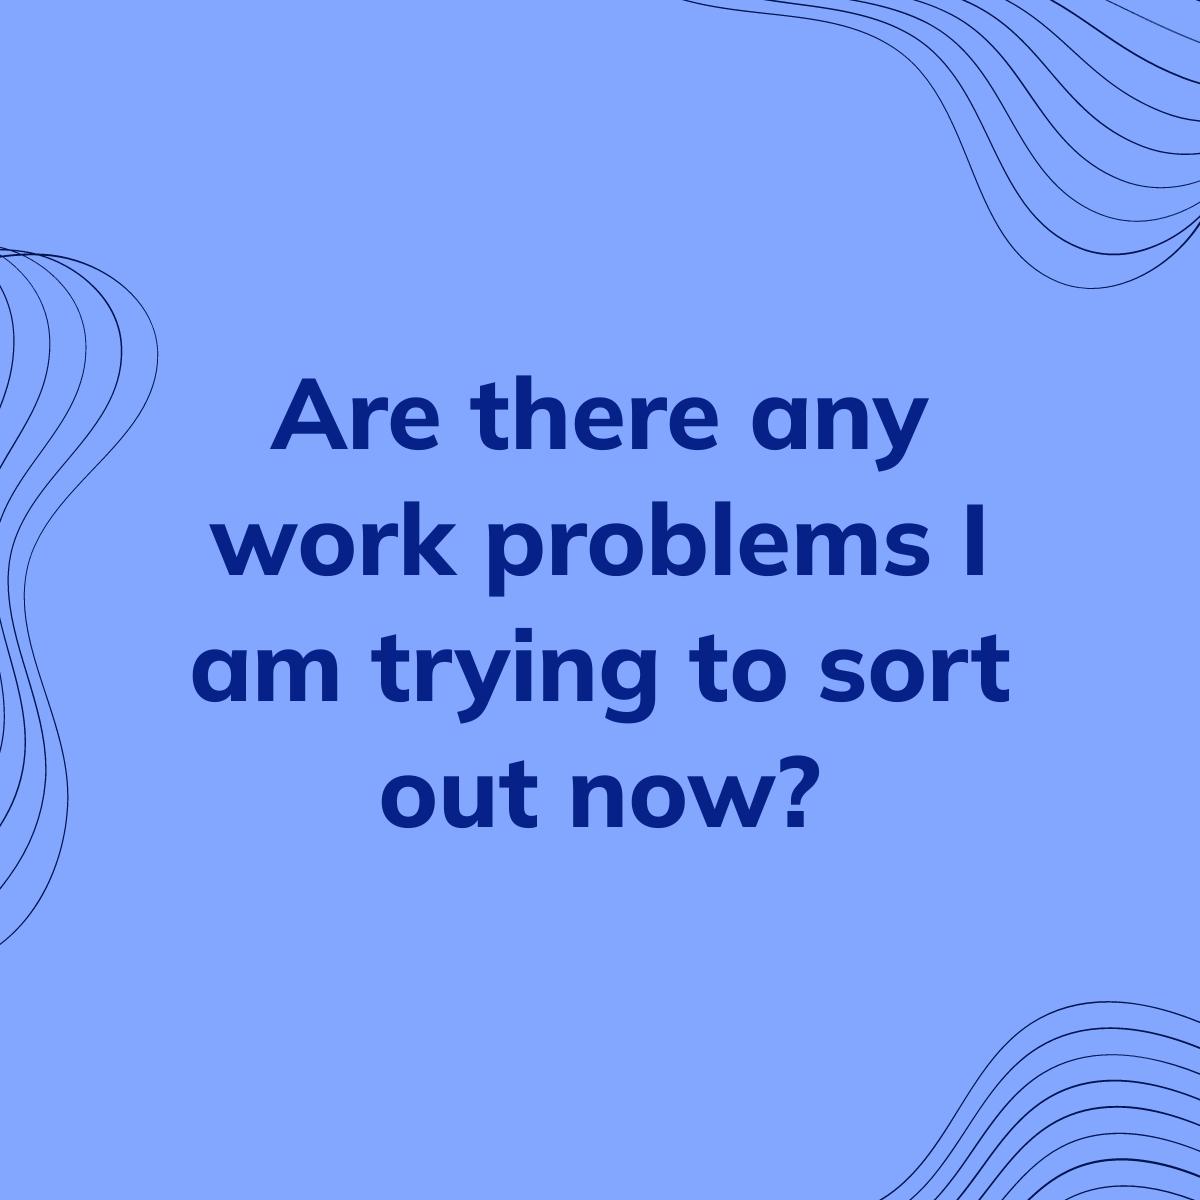 Journal Prompt: Are there any work problems I am trying to sort out now?